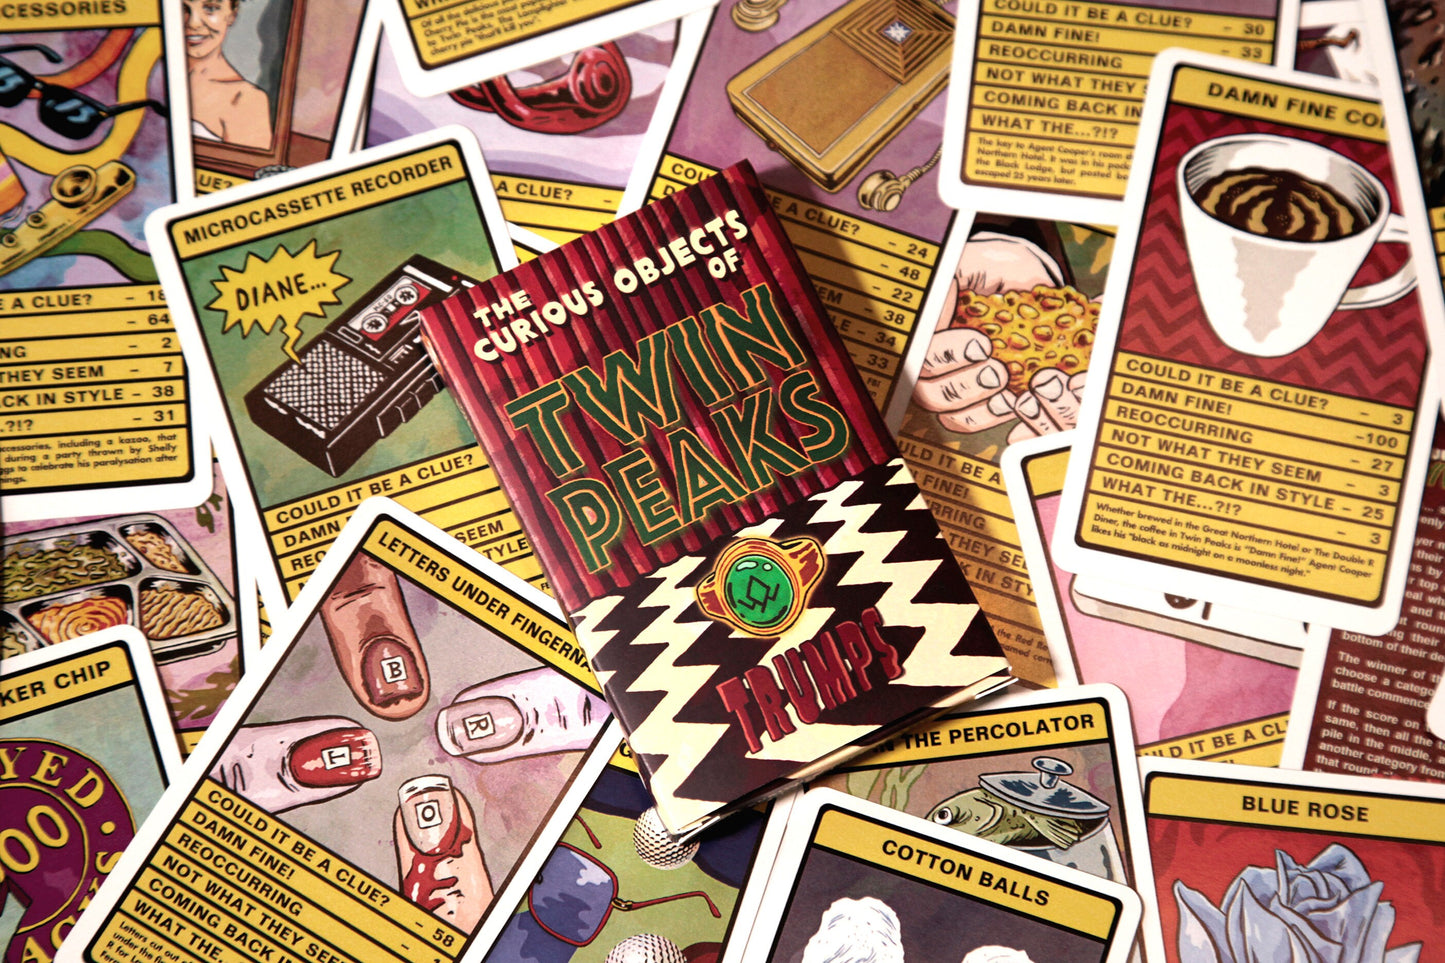 CURIOUS OBJECTS OF TWIN PEAKS TRUMPS